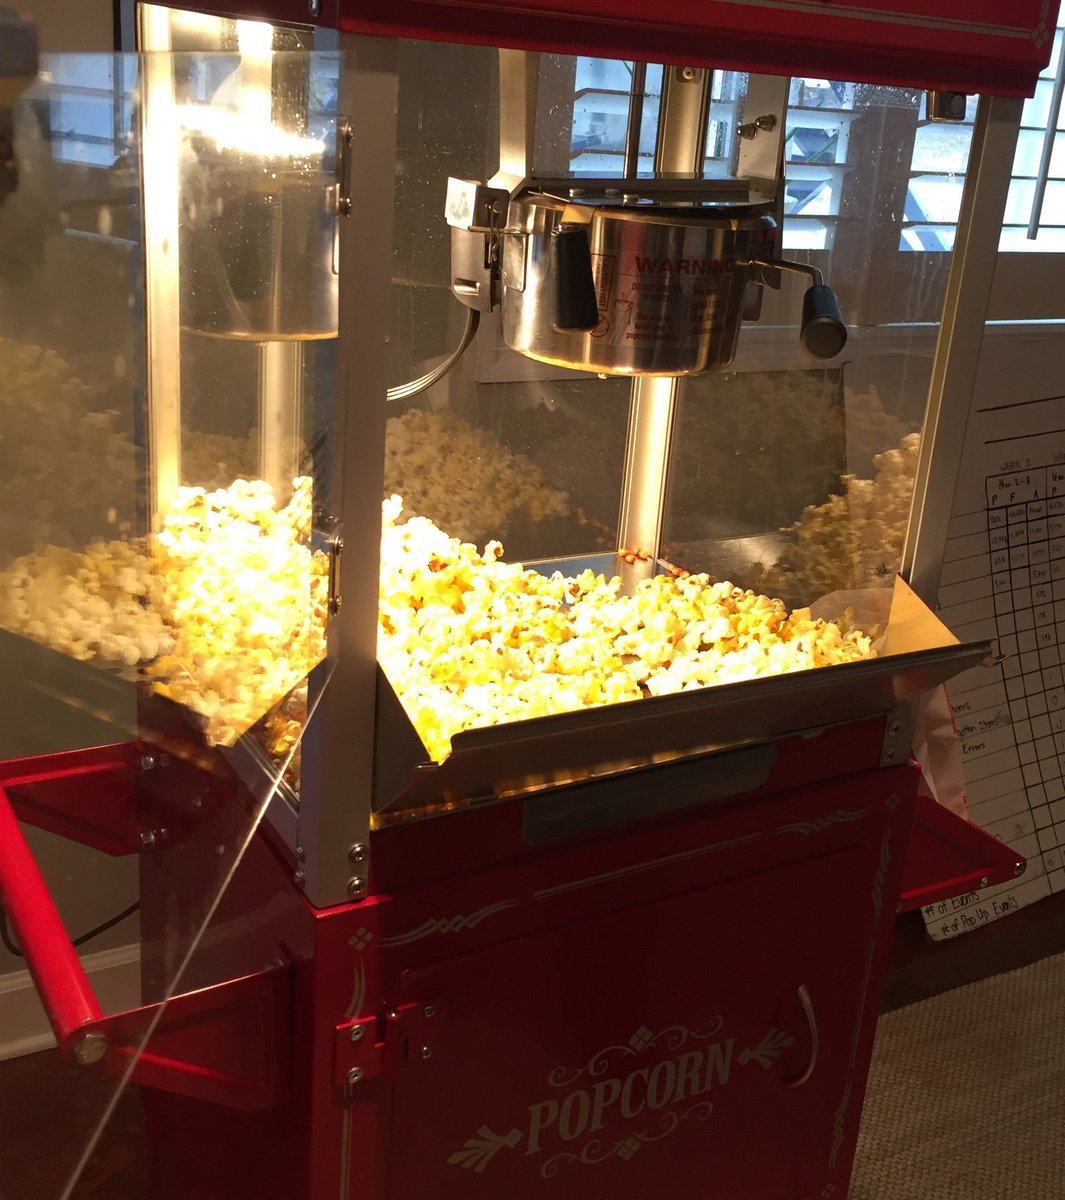 We can pop it like it's hot anywhere, anytime. #justaddbutter #popcorn